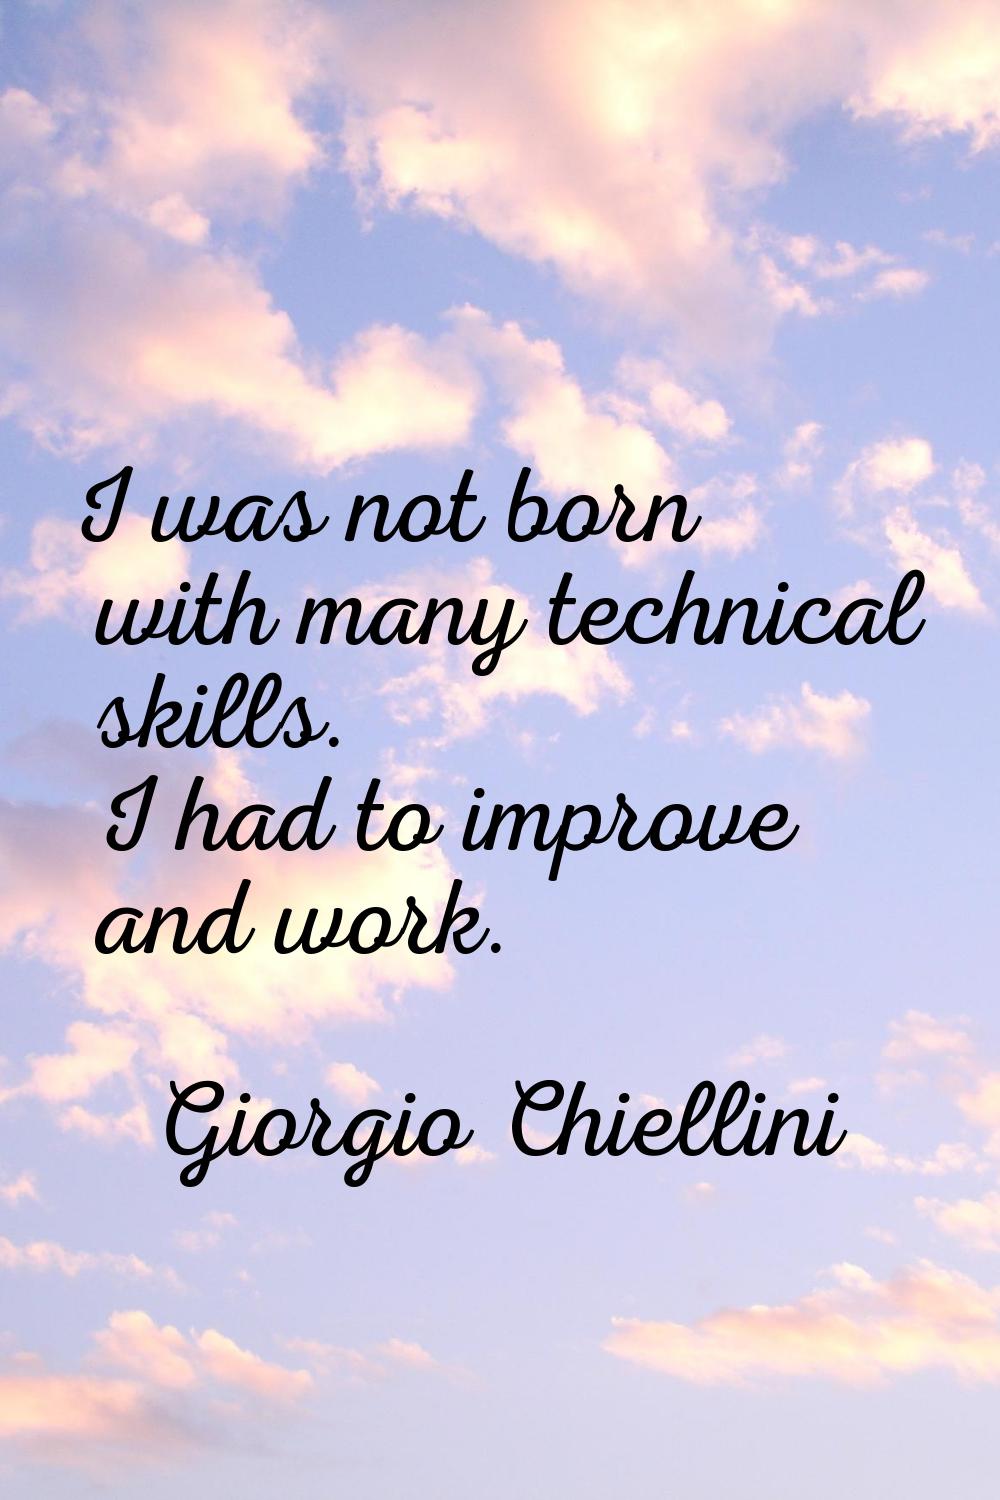 I was not born with many technical skills. I had to improve and work.